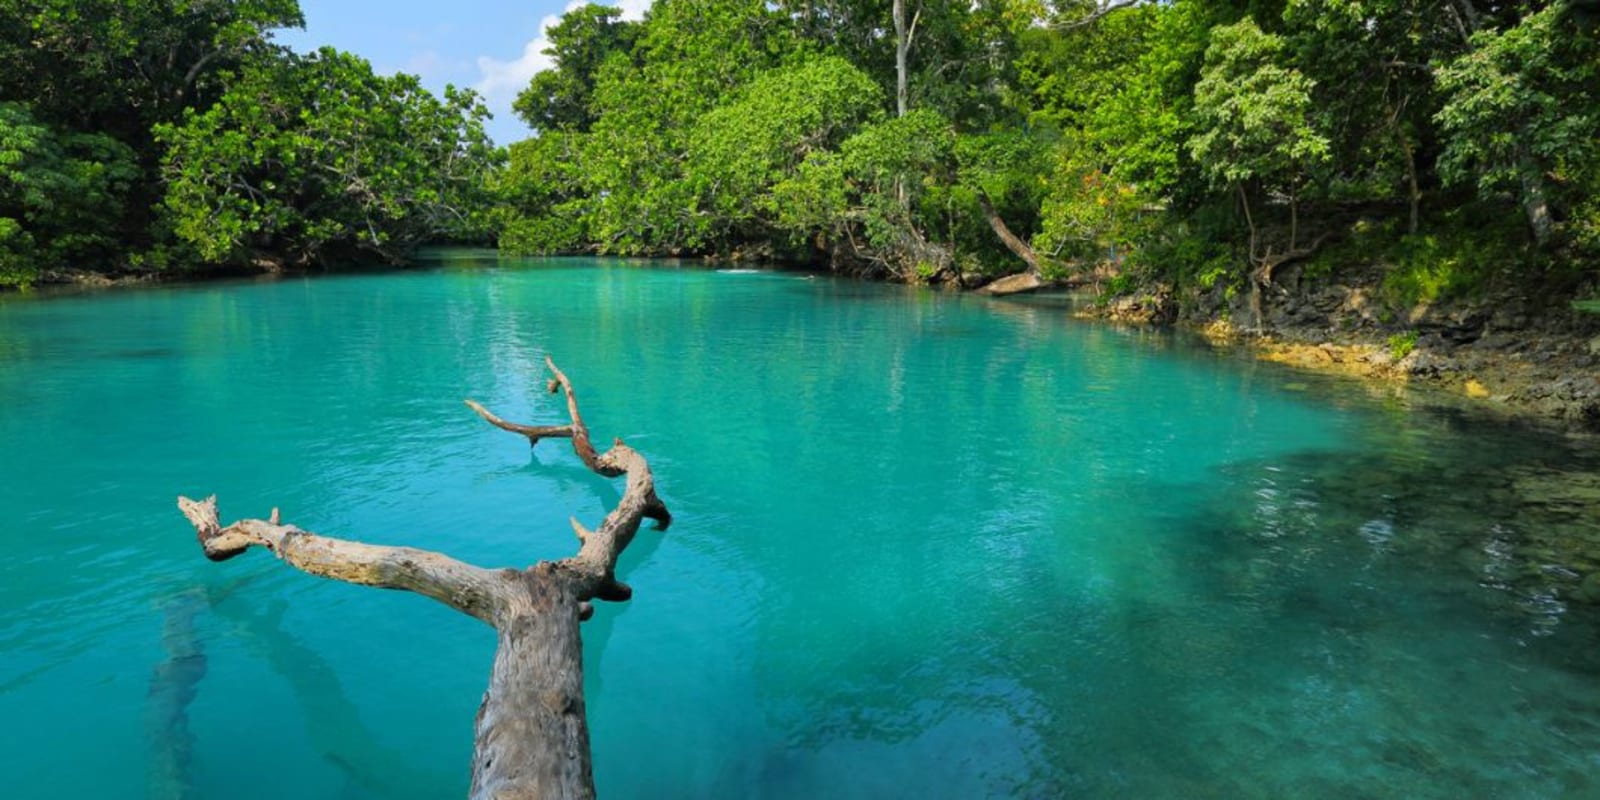 A branch with no leave overhanging the clear water of Blue Lagoon